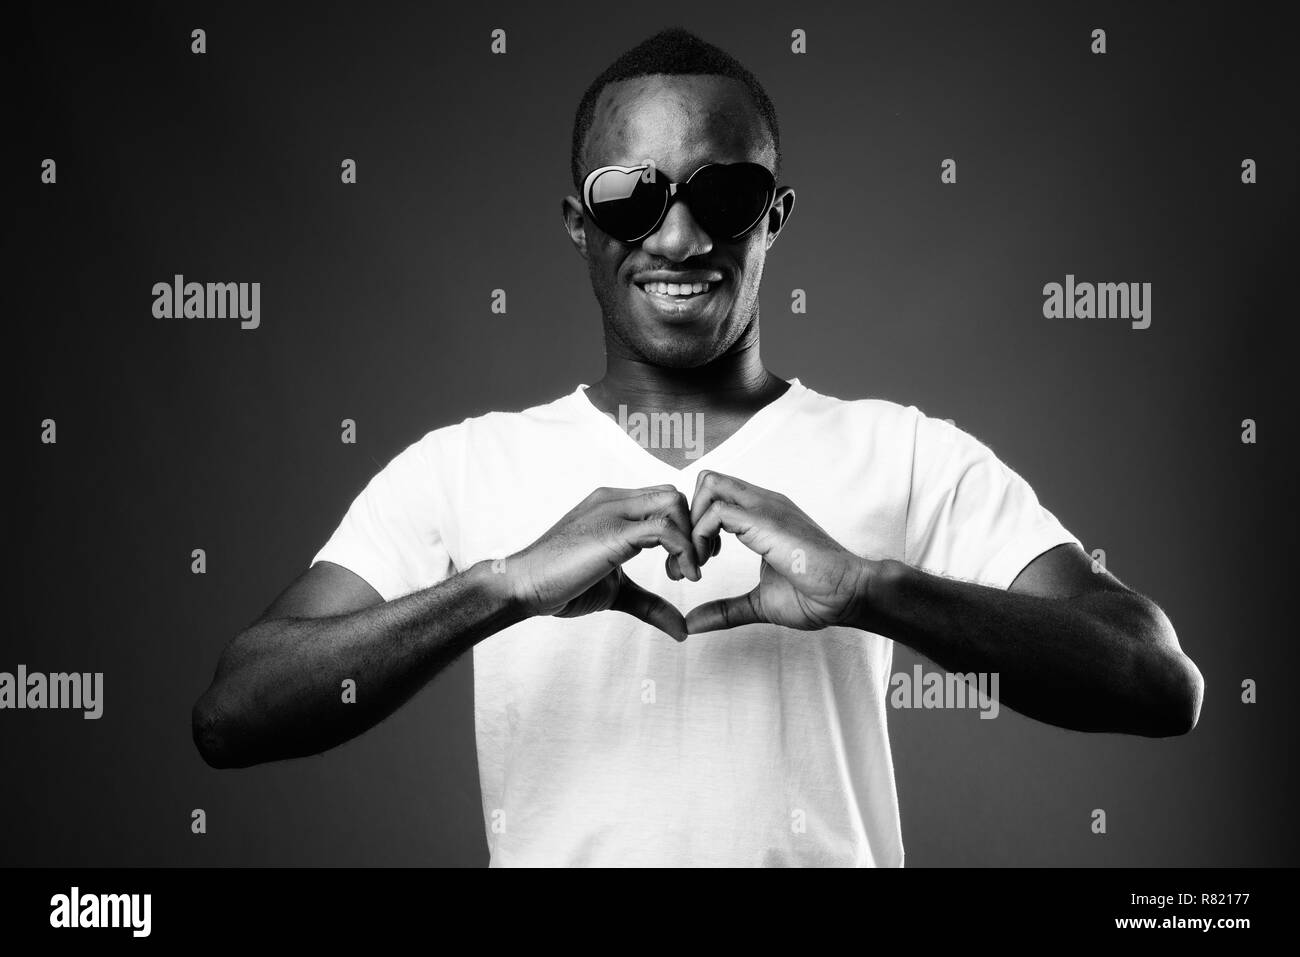 Young African man wearing sunglasses while making heart sign Stock Photo